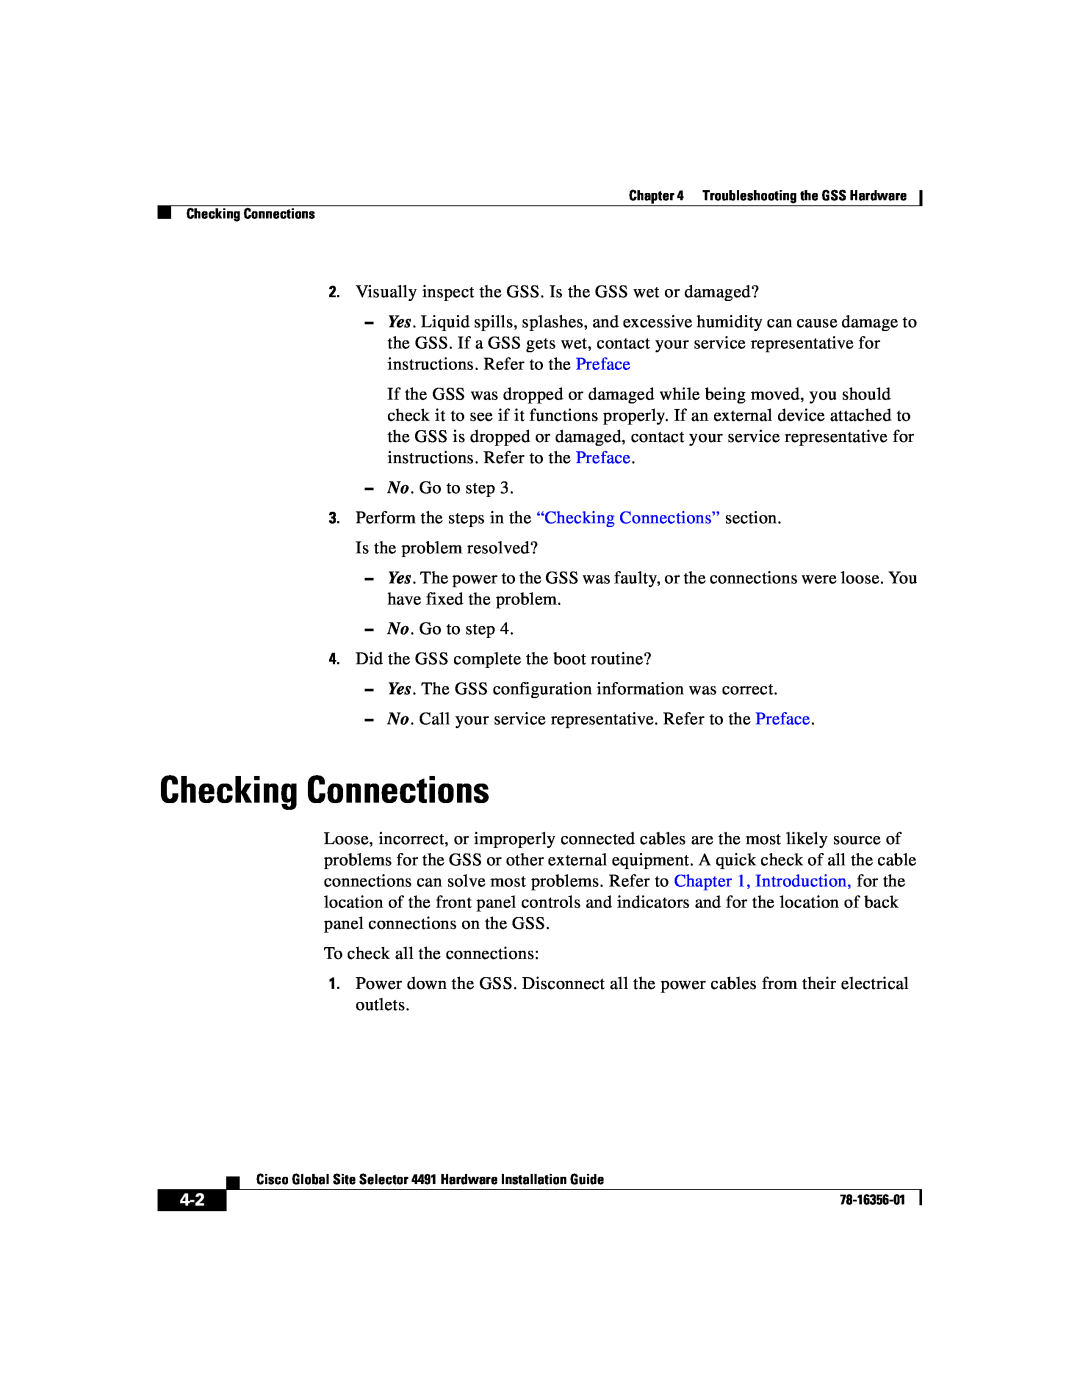 Cisco Systems 78-16356-01 manual Checking Connections 